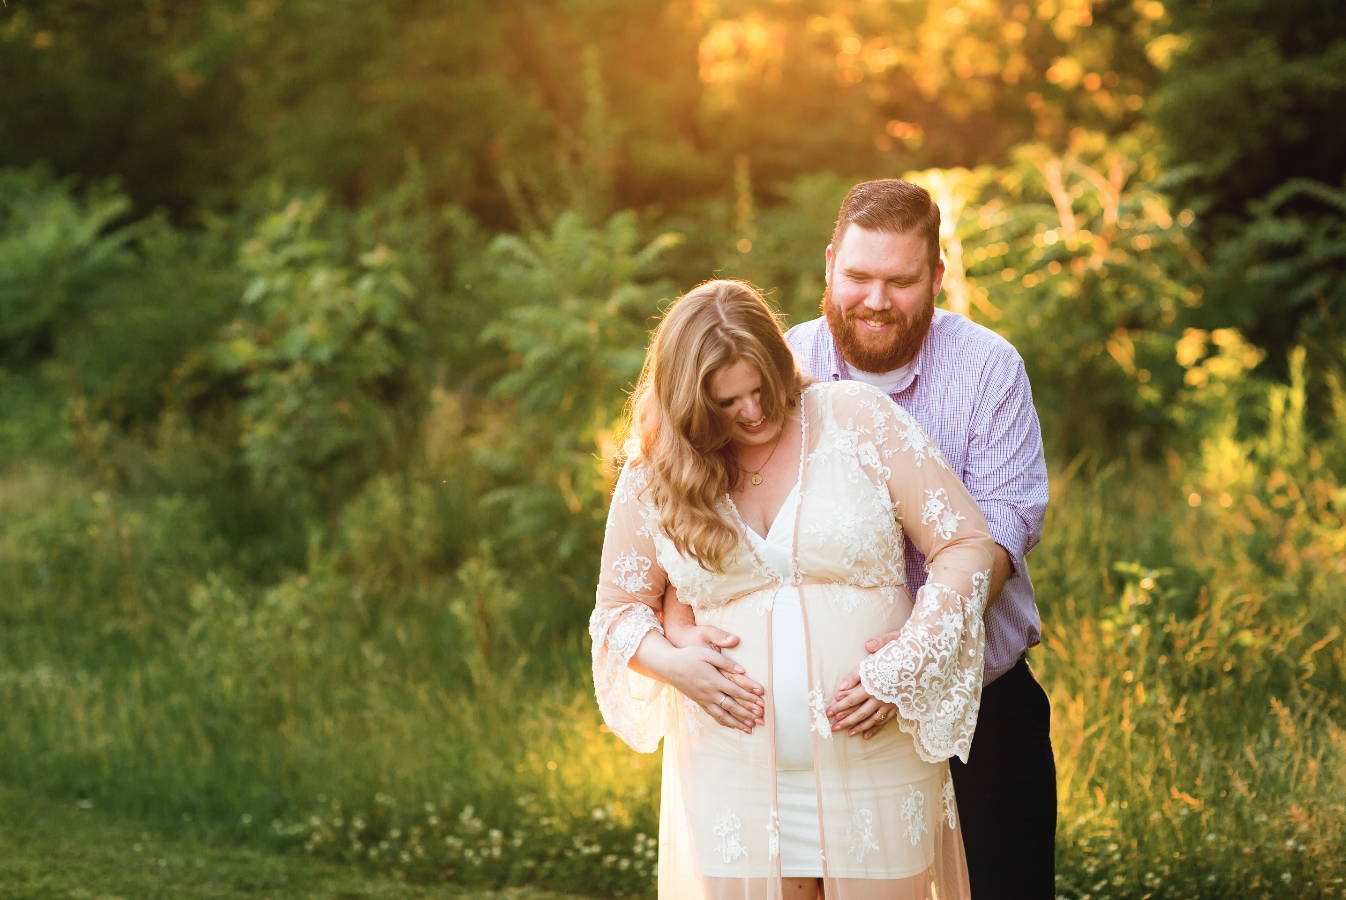 Maternity-Session-Photographer-Hamilton-Oakville-Waterfront-Golden-Hour-Glow-Photography-Moments-by-Lauren-Photo-Image-1.png